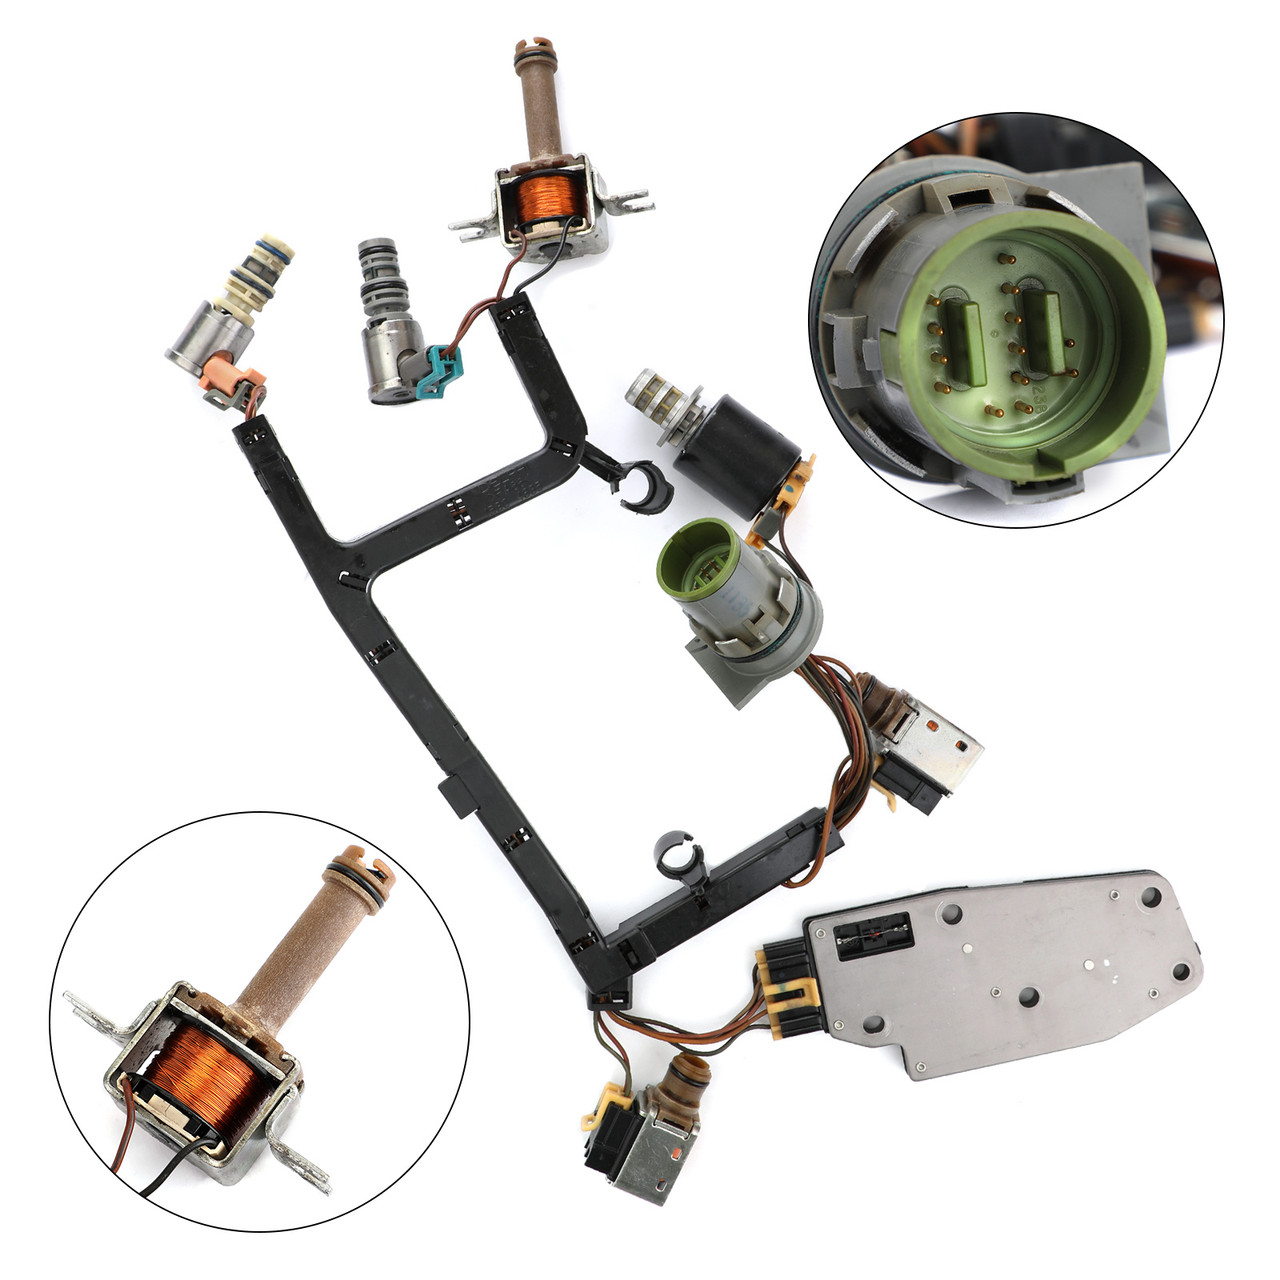 4L60E Refurbished Transmission Solenoid Kit W/Harness Compatible with GM 1993-2002 PWM Set